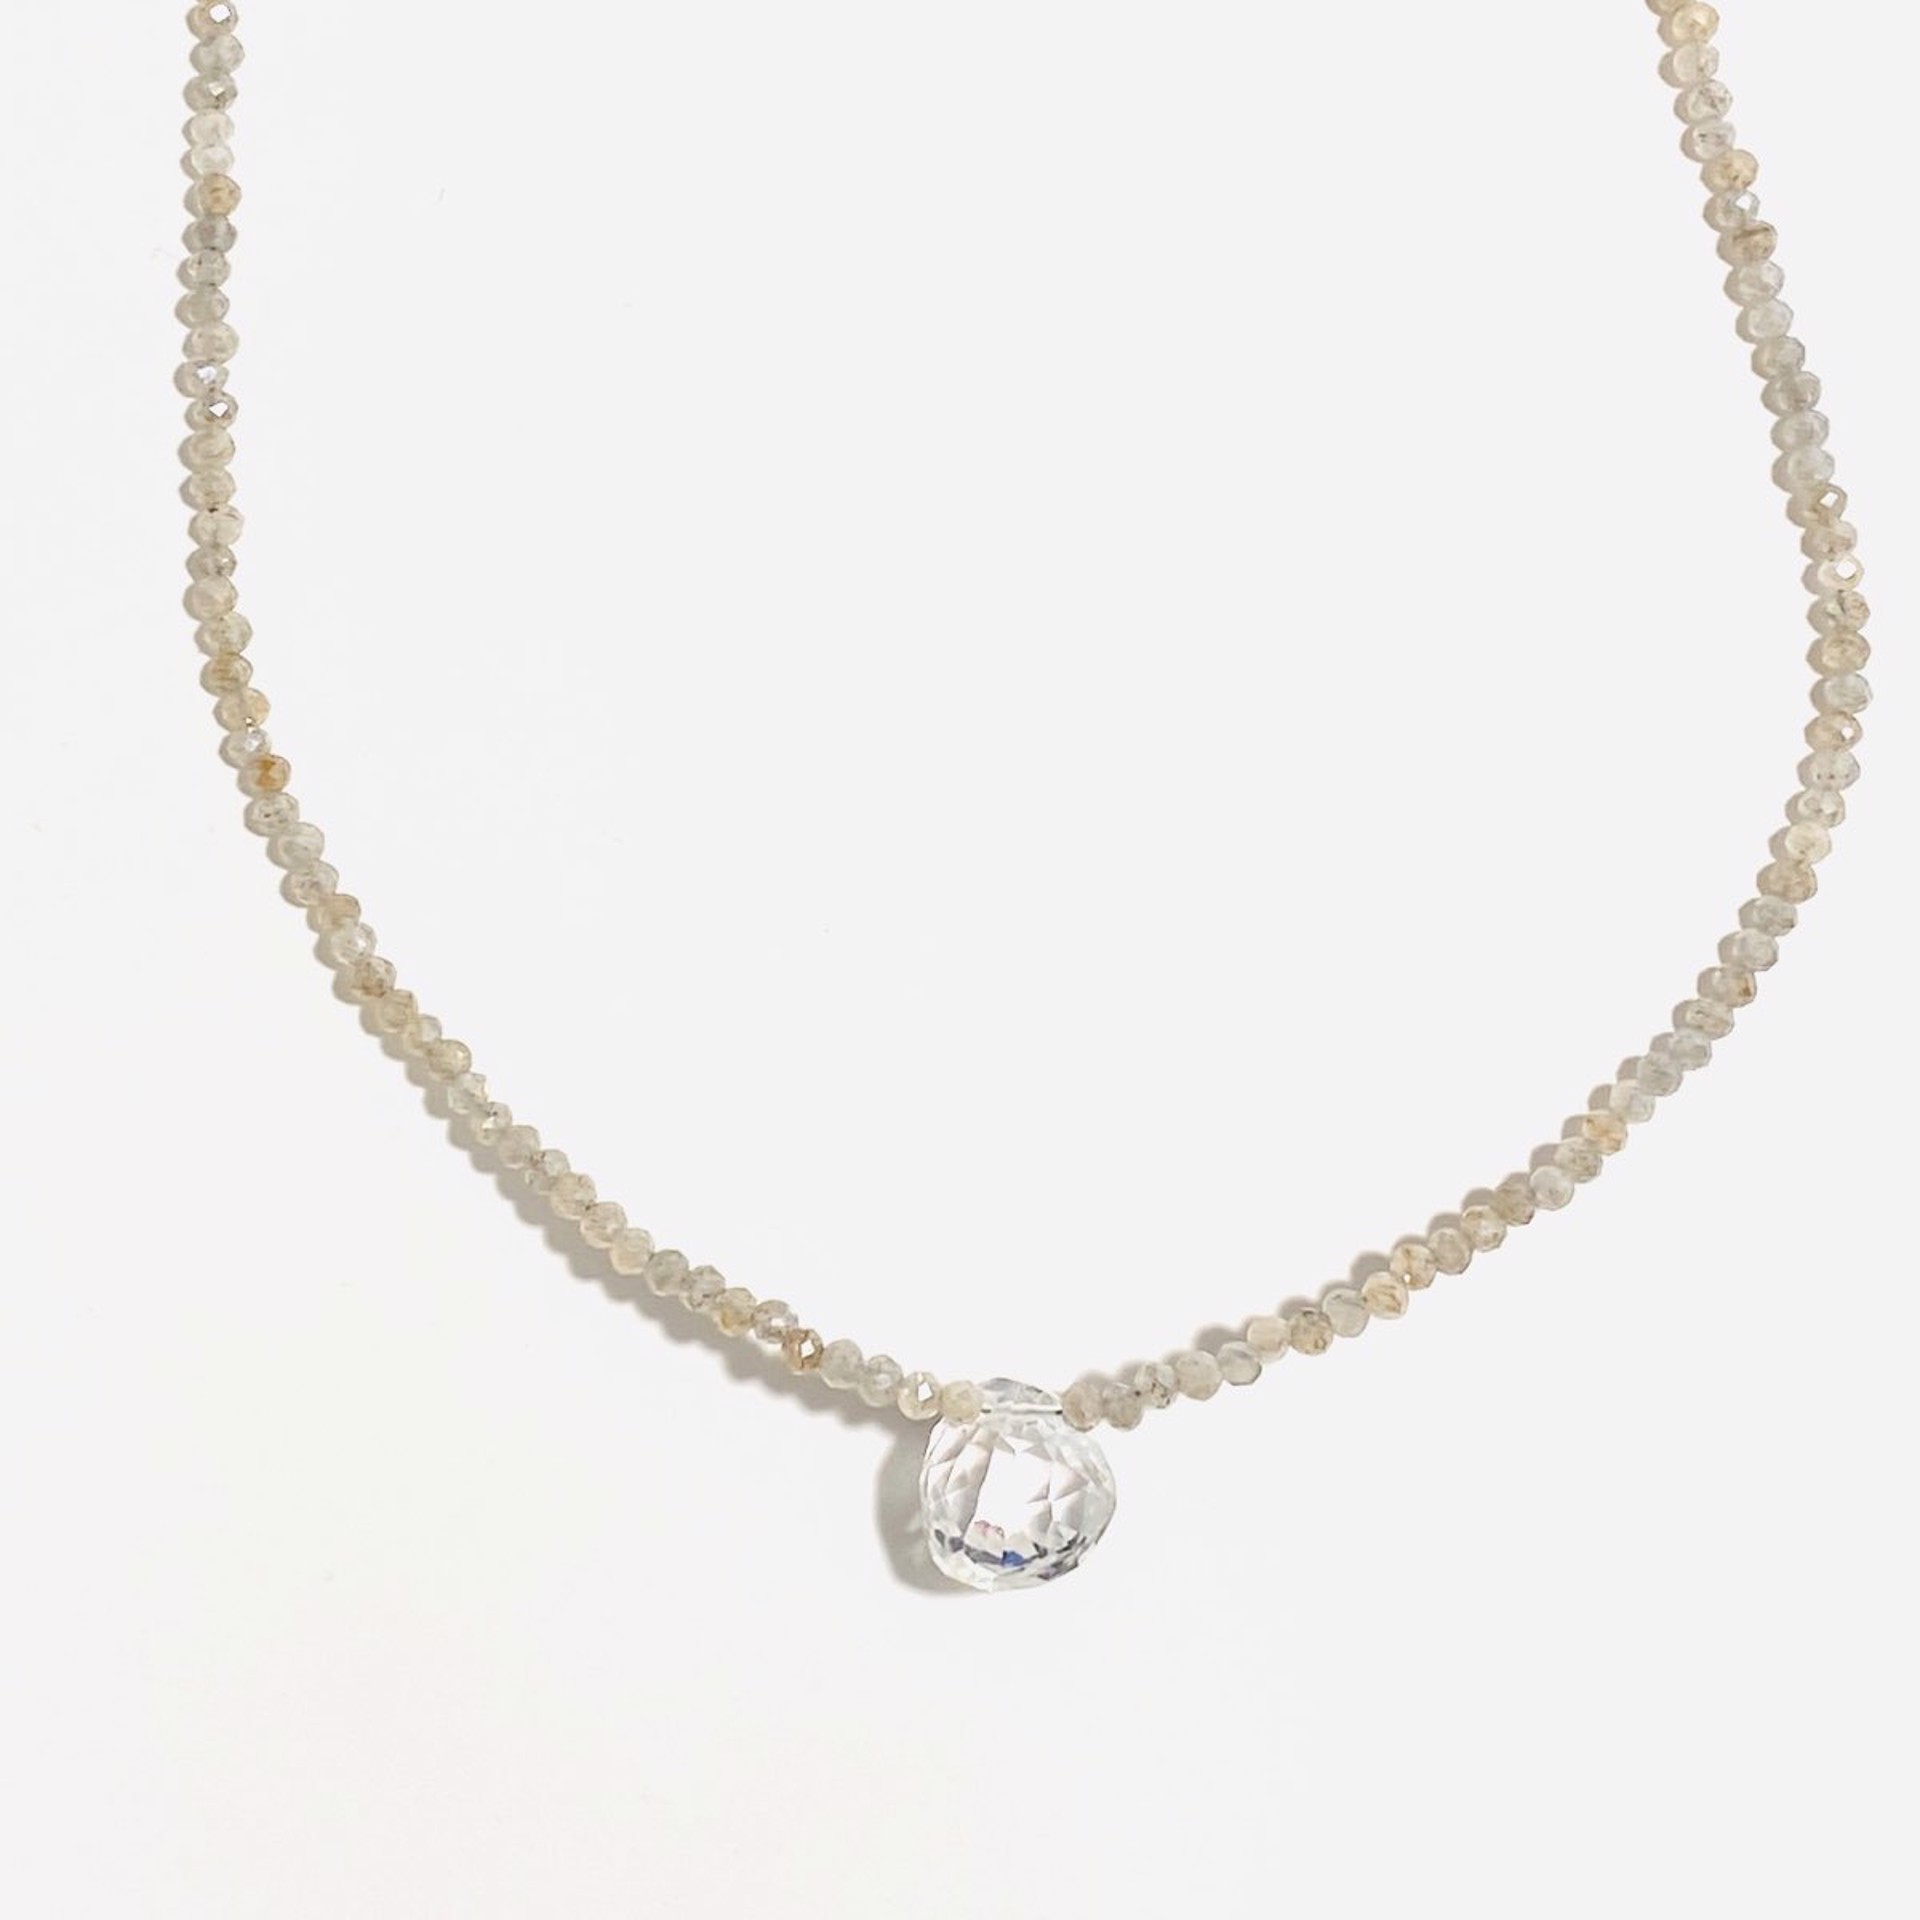 Faceted Tiny Labraddorite Faceted Quartz Drop Necklace NT22-239 by Nance Trueworthy